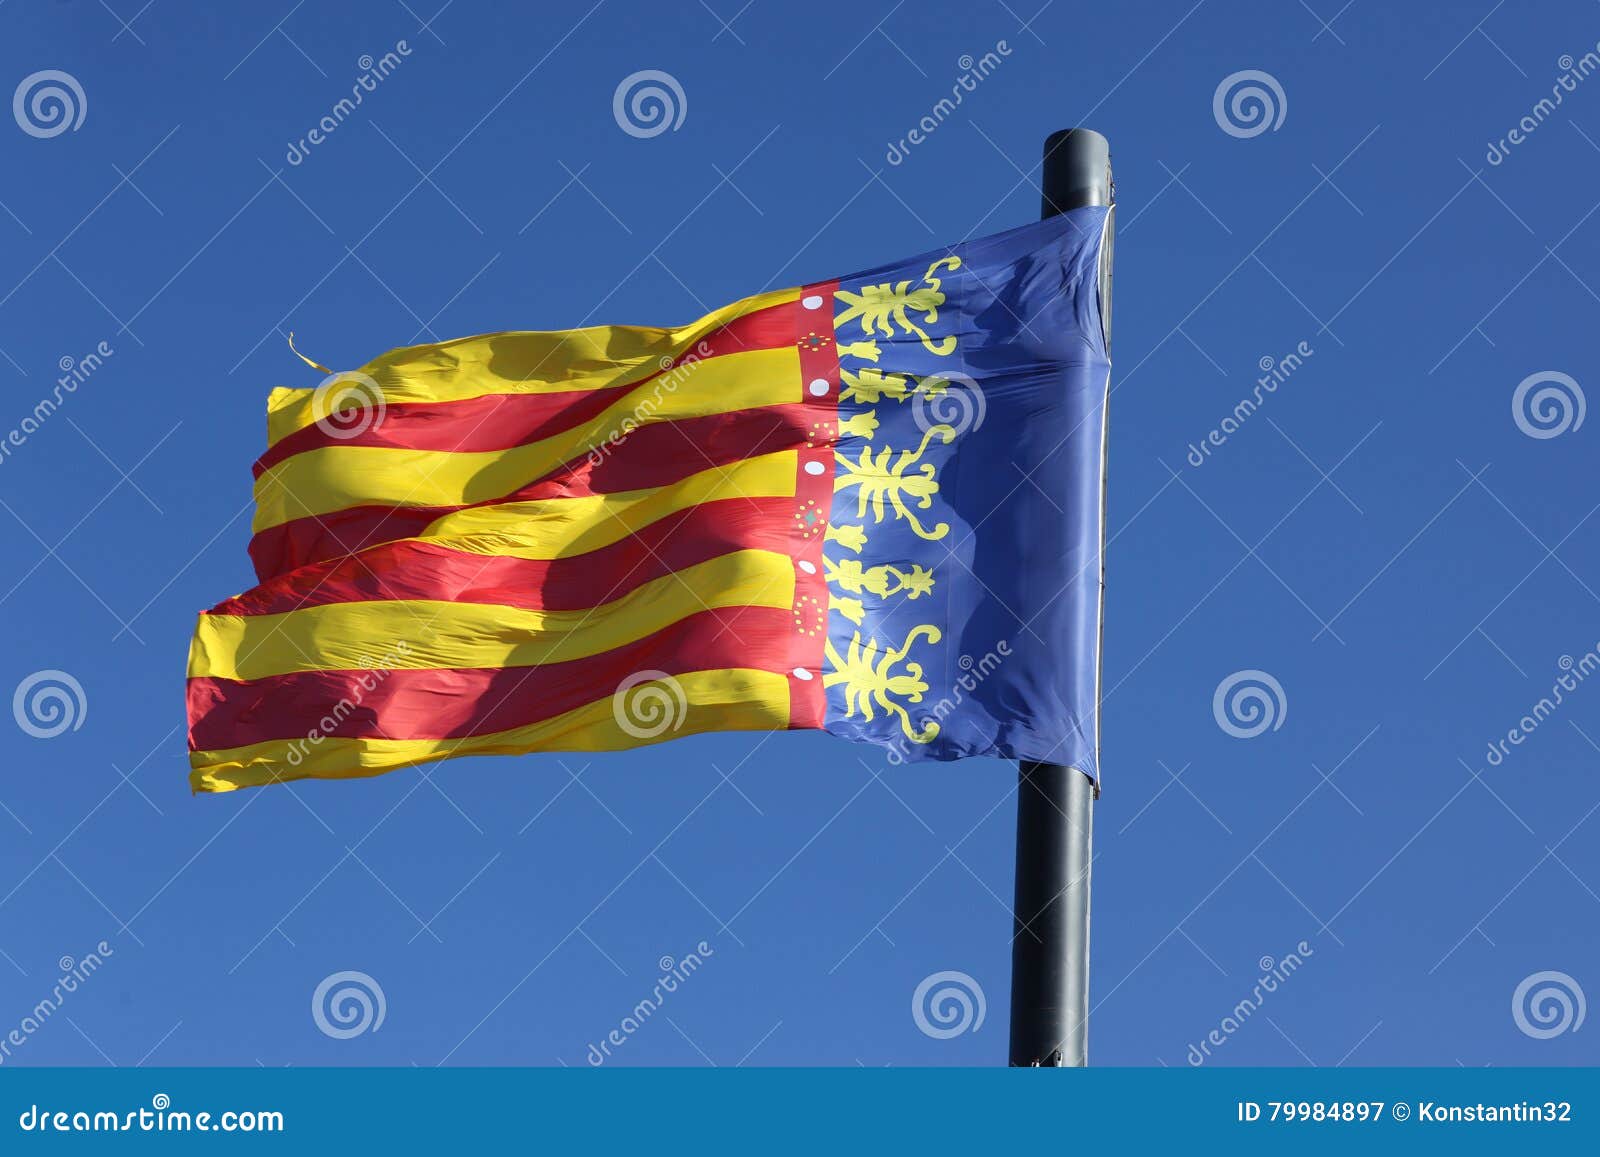 flag of comunidad valenciana, region in spain, moving in the win